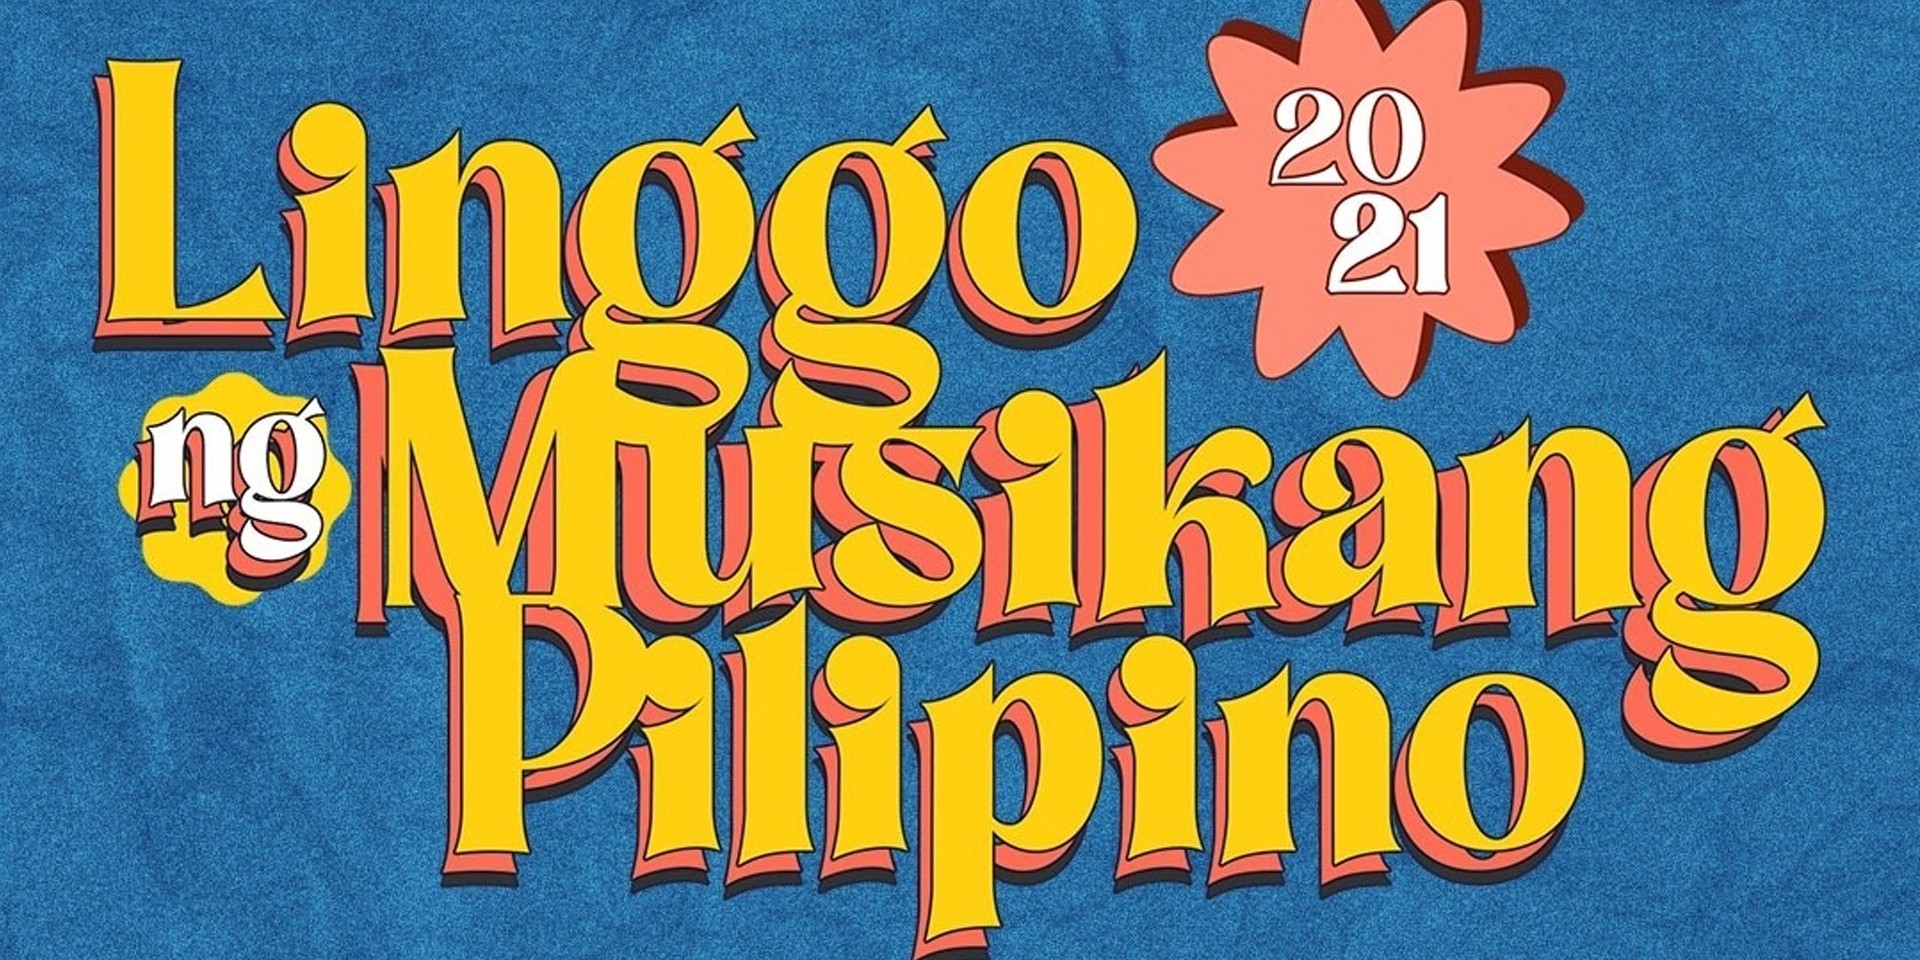 Linggo Ng Musikang Pilipino returns to the digital stage with diverse programs and shows featuring Sandwich, Kitchie Nadal, Christian Bautista, and more